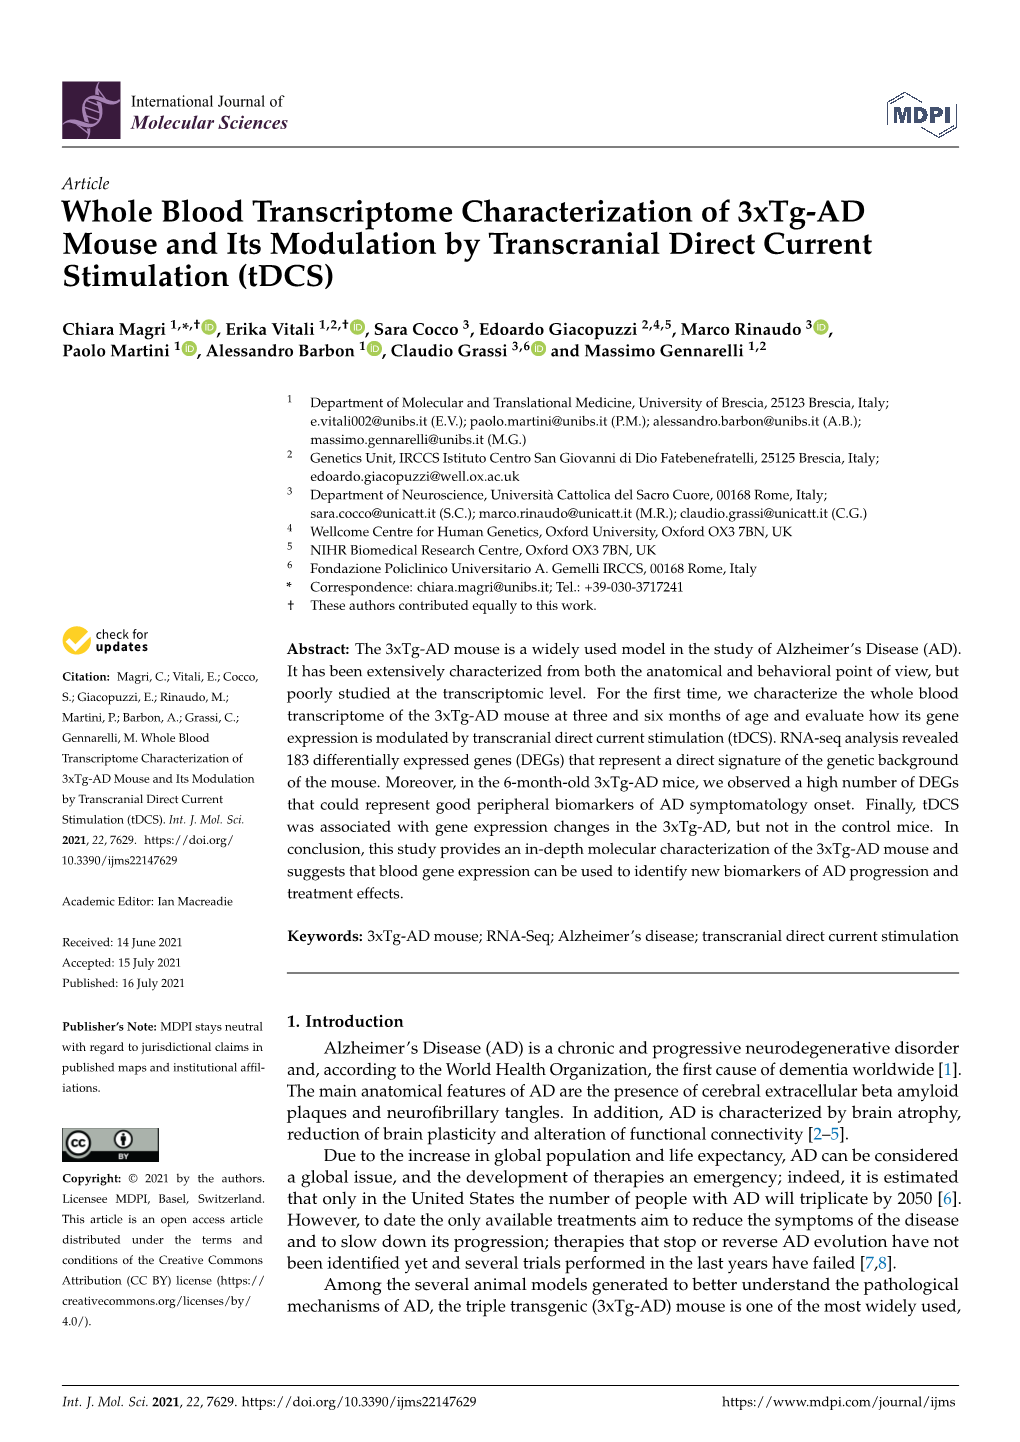 Whole Blood Transcriptome Characterization of 3Xtg-AD Mouse and Its Modulation by Transcranial Direct Current Stimulation (Tdcs)